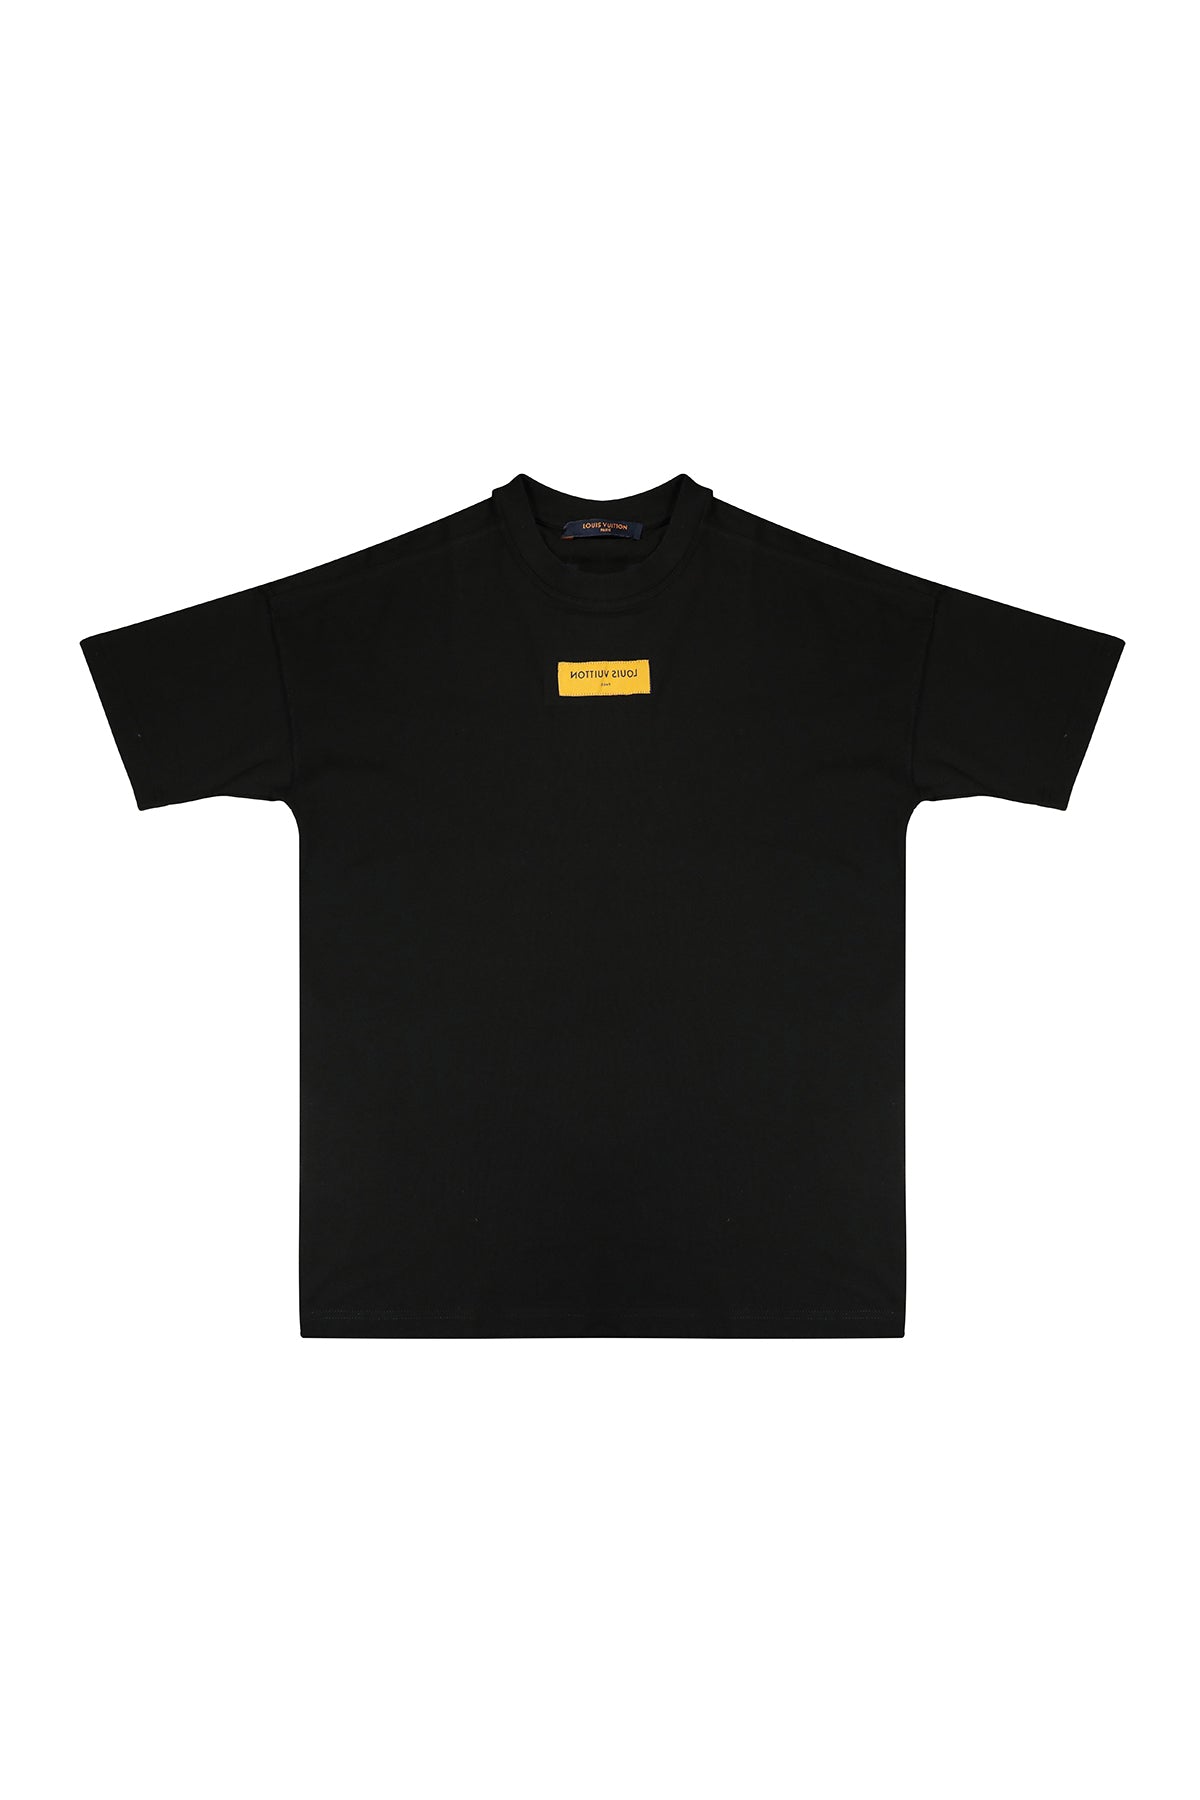 LOUIS VUITTON BACK TO FRONT INSIDE OUT BLACK T-SHIRT